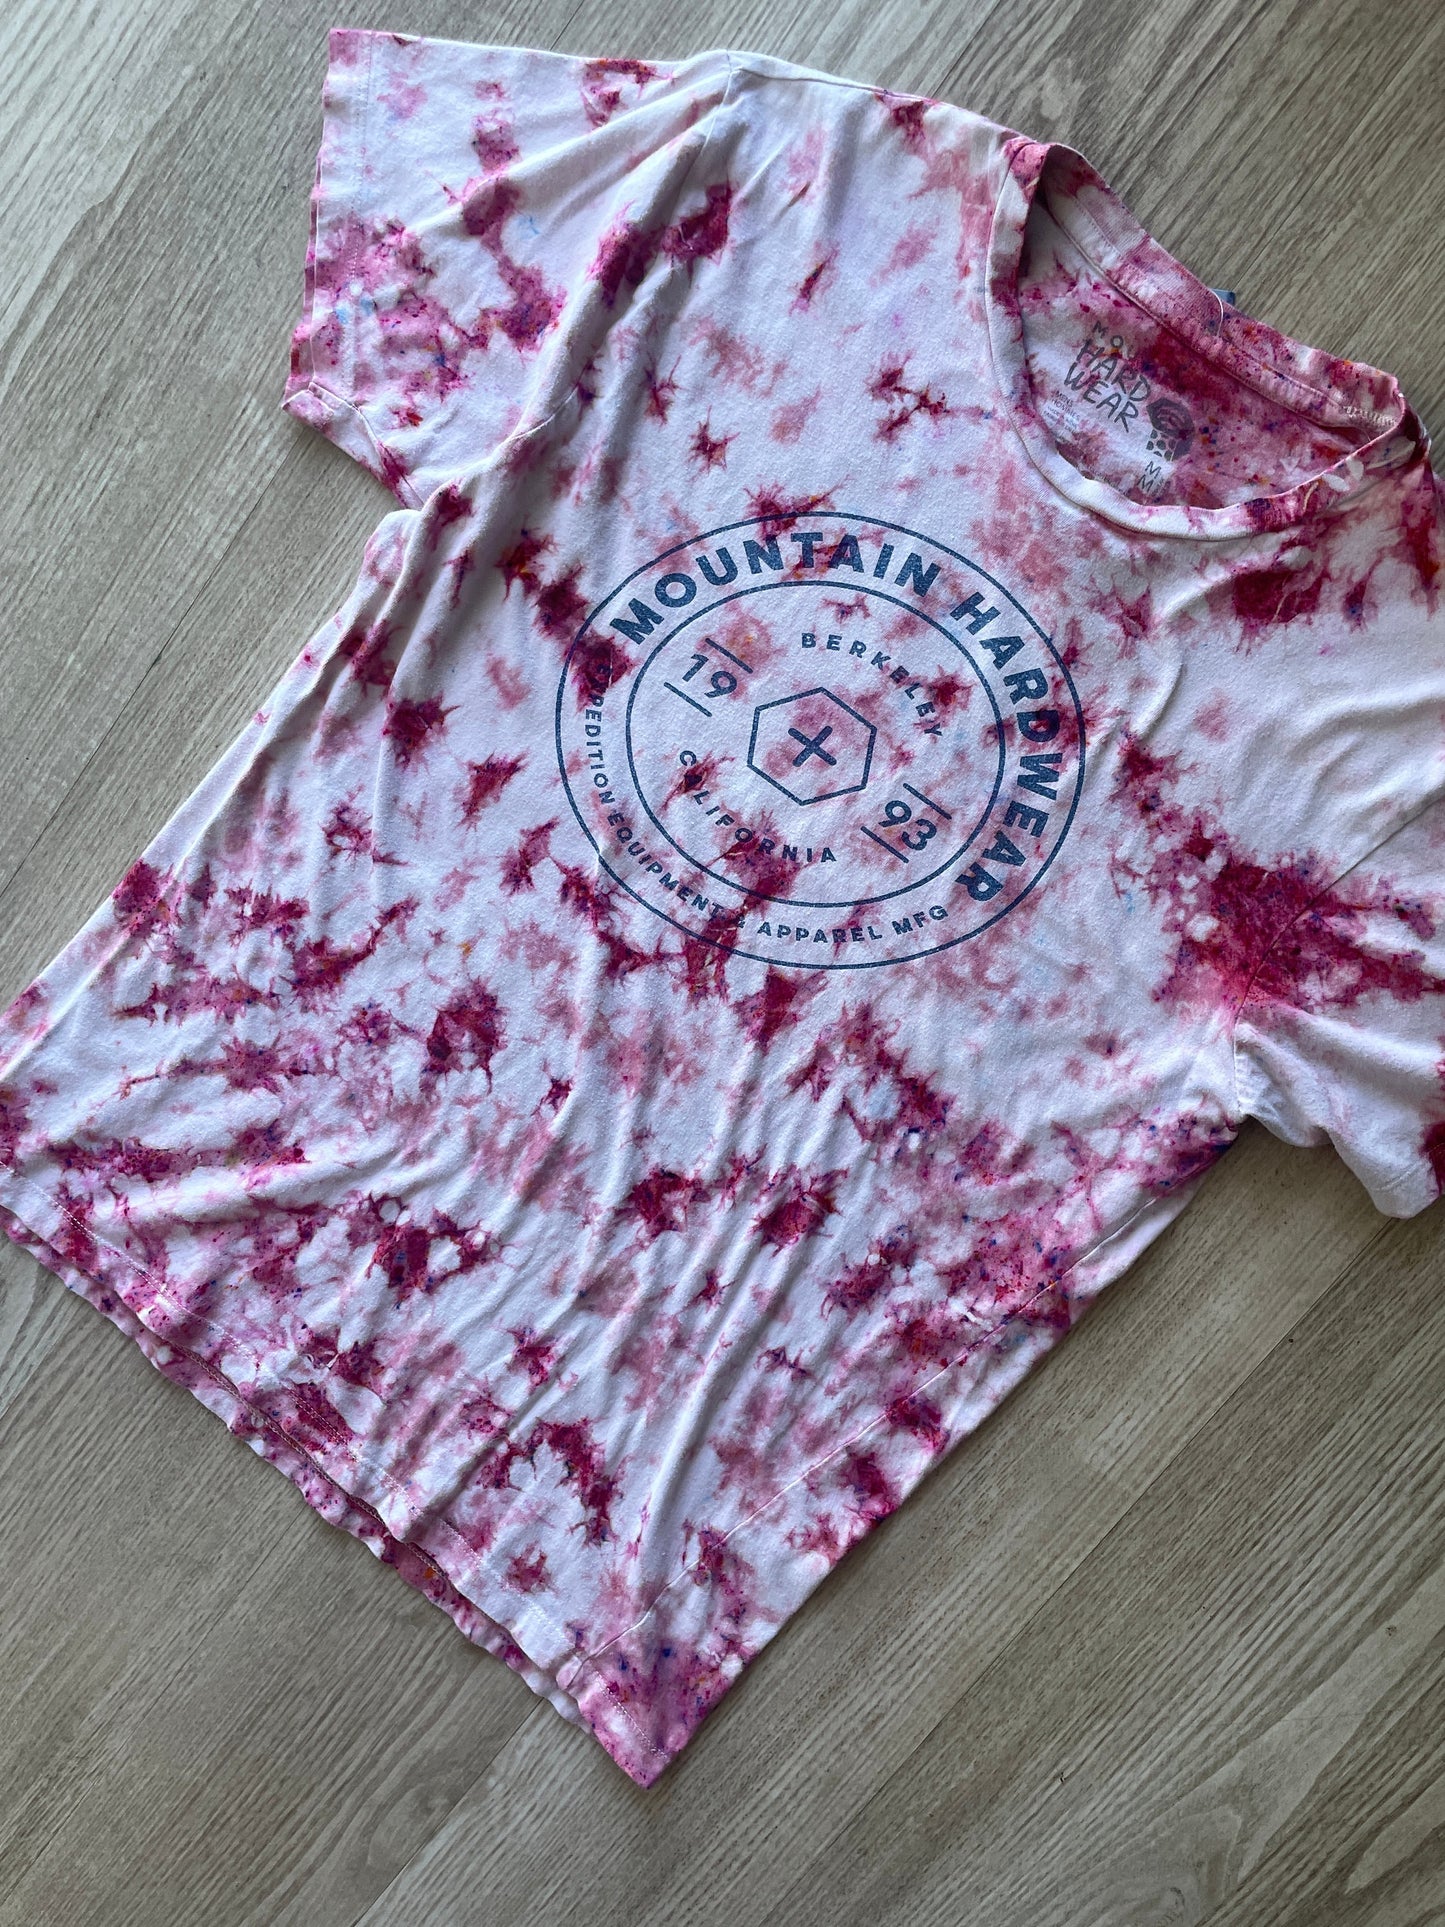 MEDIUM Men’s Mountain Hardwear Handmade Tie Dye Short Sleeve T-Shirt | One-Of-a-Kind Upcycled White and Pink "Funfetti" Crumpled Top